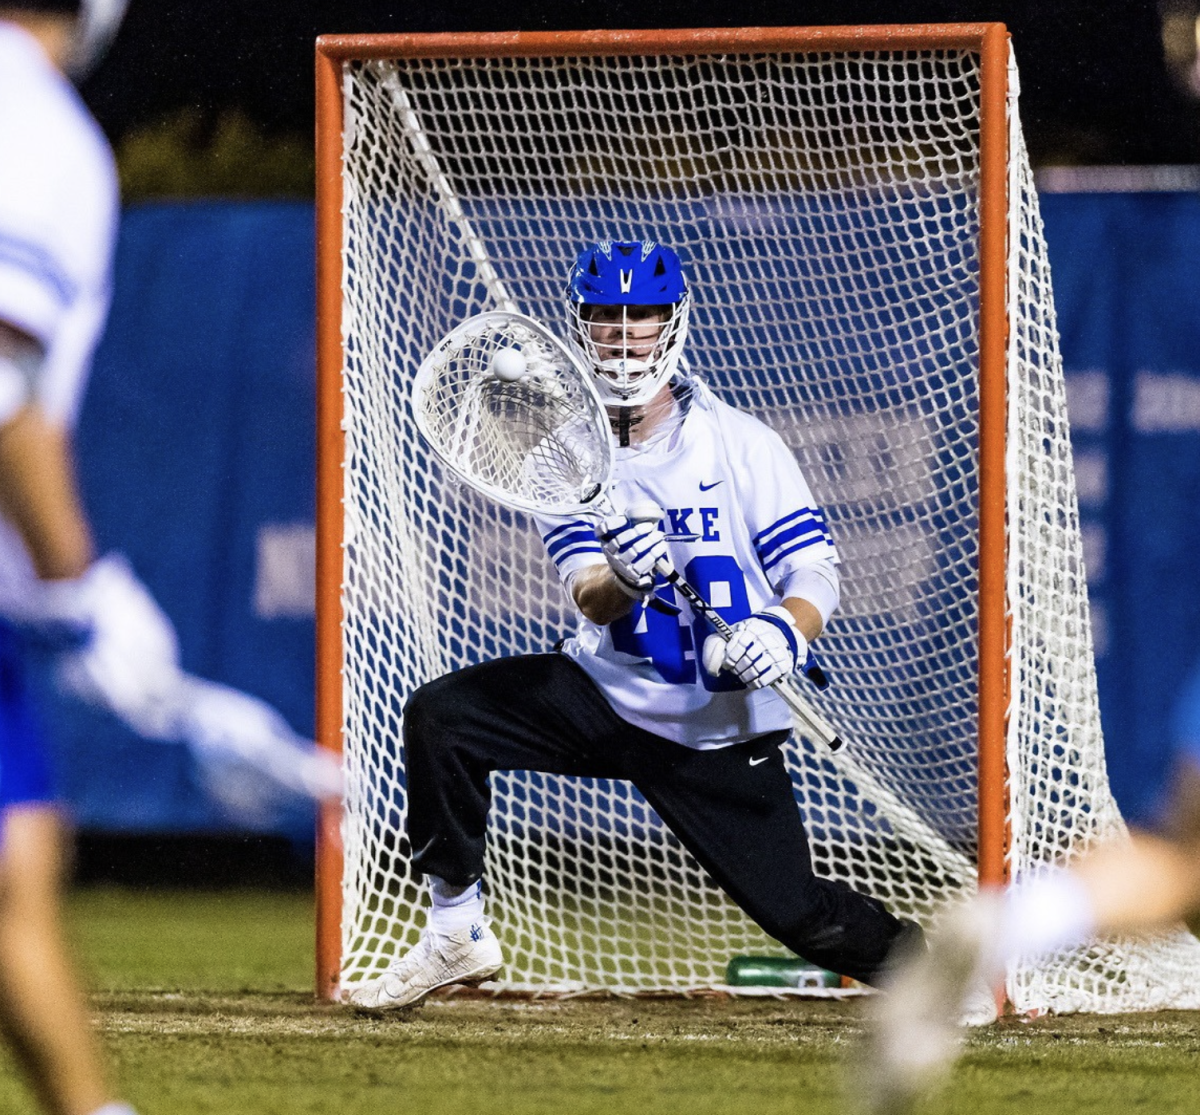 Will+Helm+%E2%80%9918+averaged+only+10.97+goals+allowed+per+game%2C+a+key+contribution+that+helped+Duke+reach+the+NCAA+Division+I+championship+against+Notre+Dame+last+year.